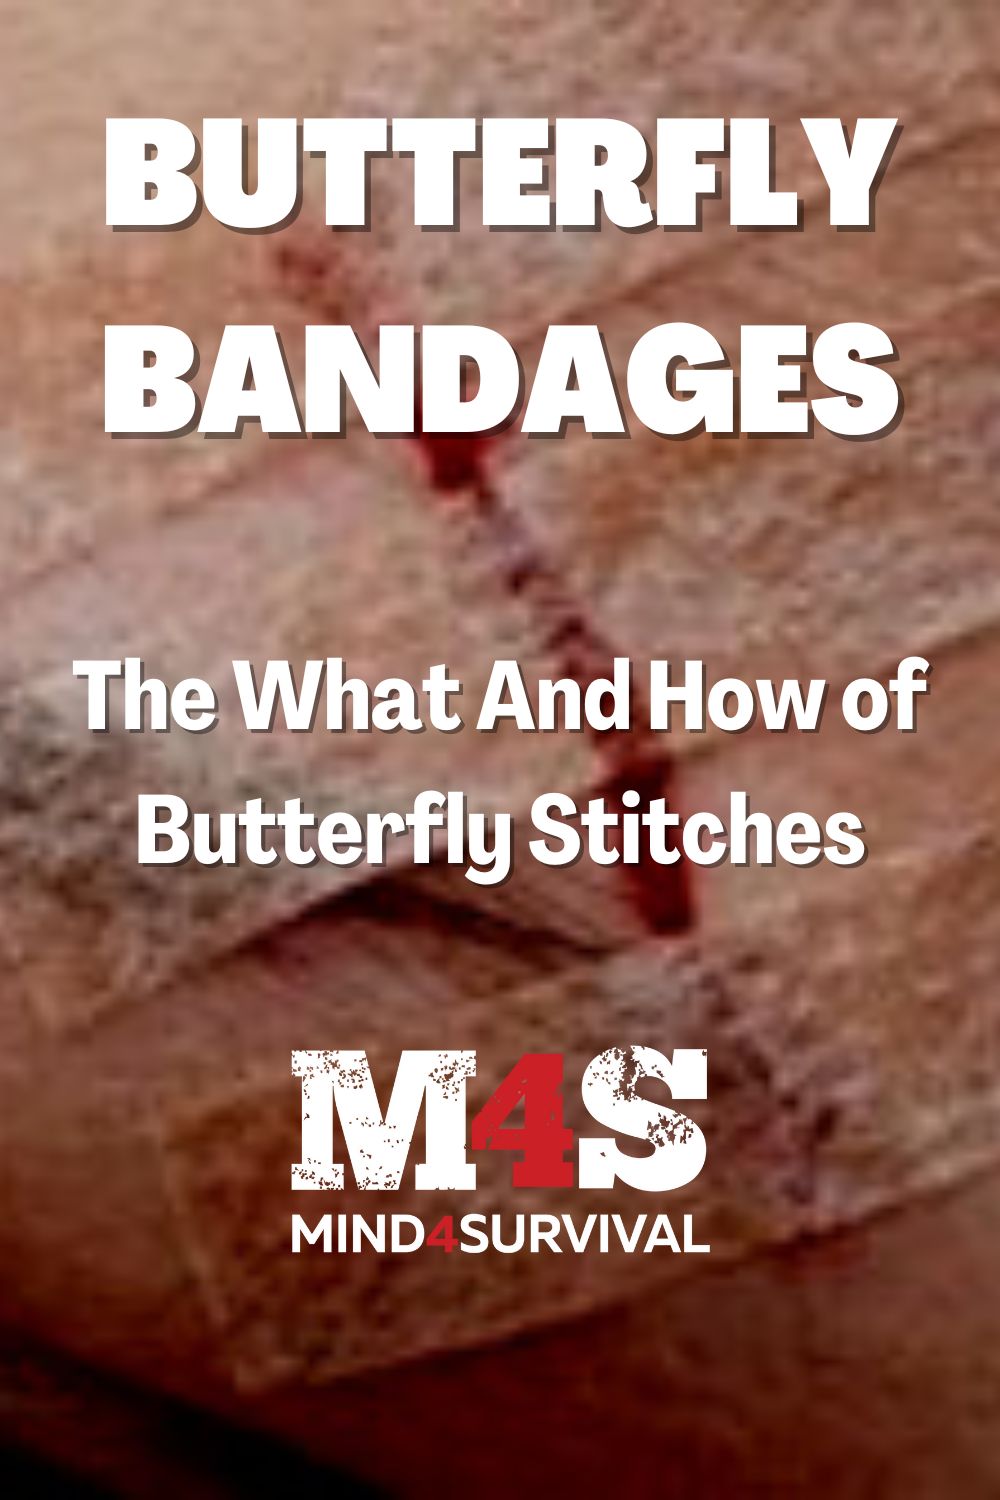 Butterfly Bandage: The What and How of Butterfly Stitches